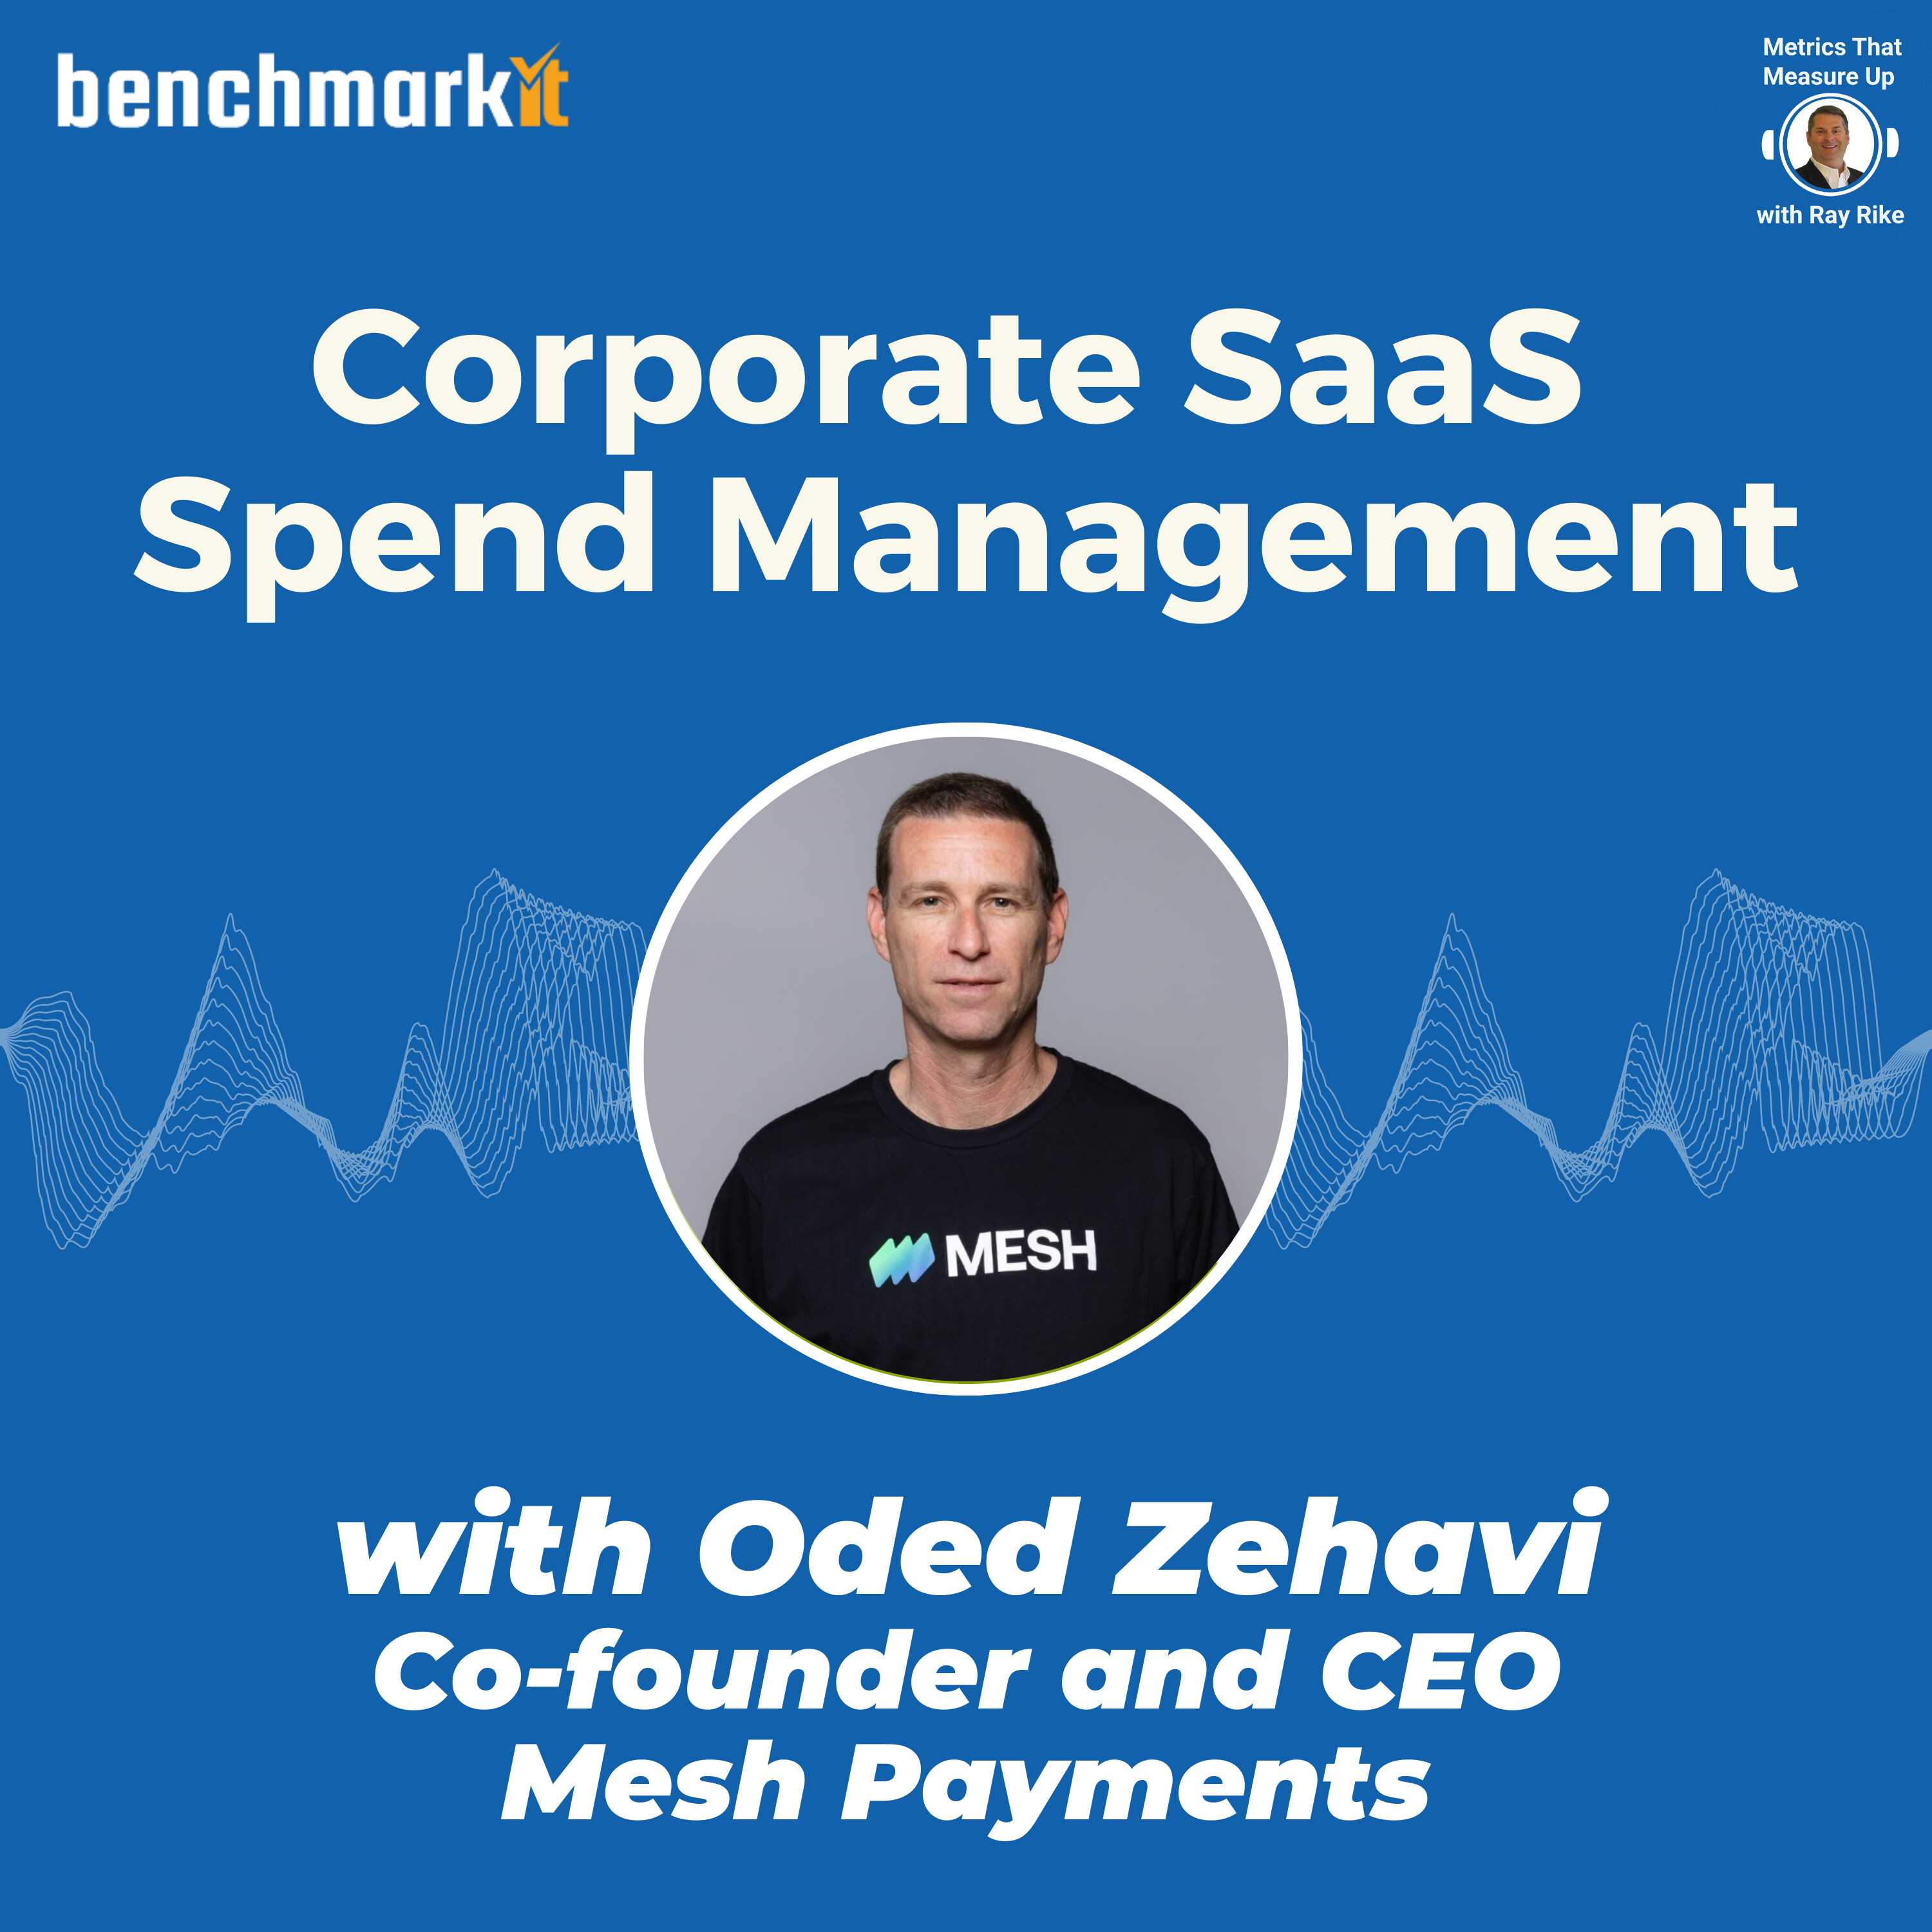 Corporate Spend Management - with Oded Zehavi, Founder and CEO Mesh Payments